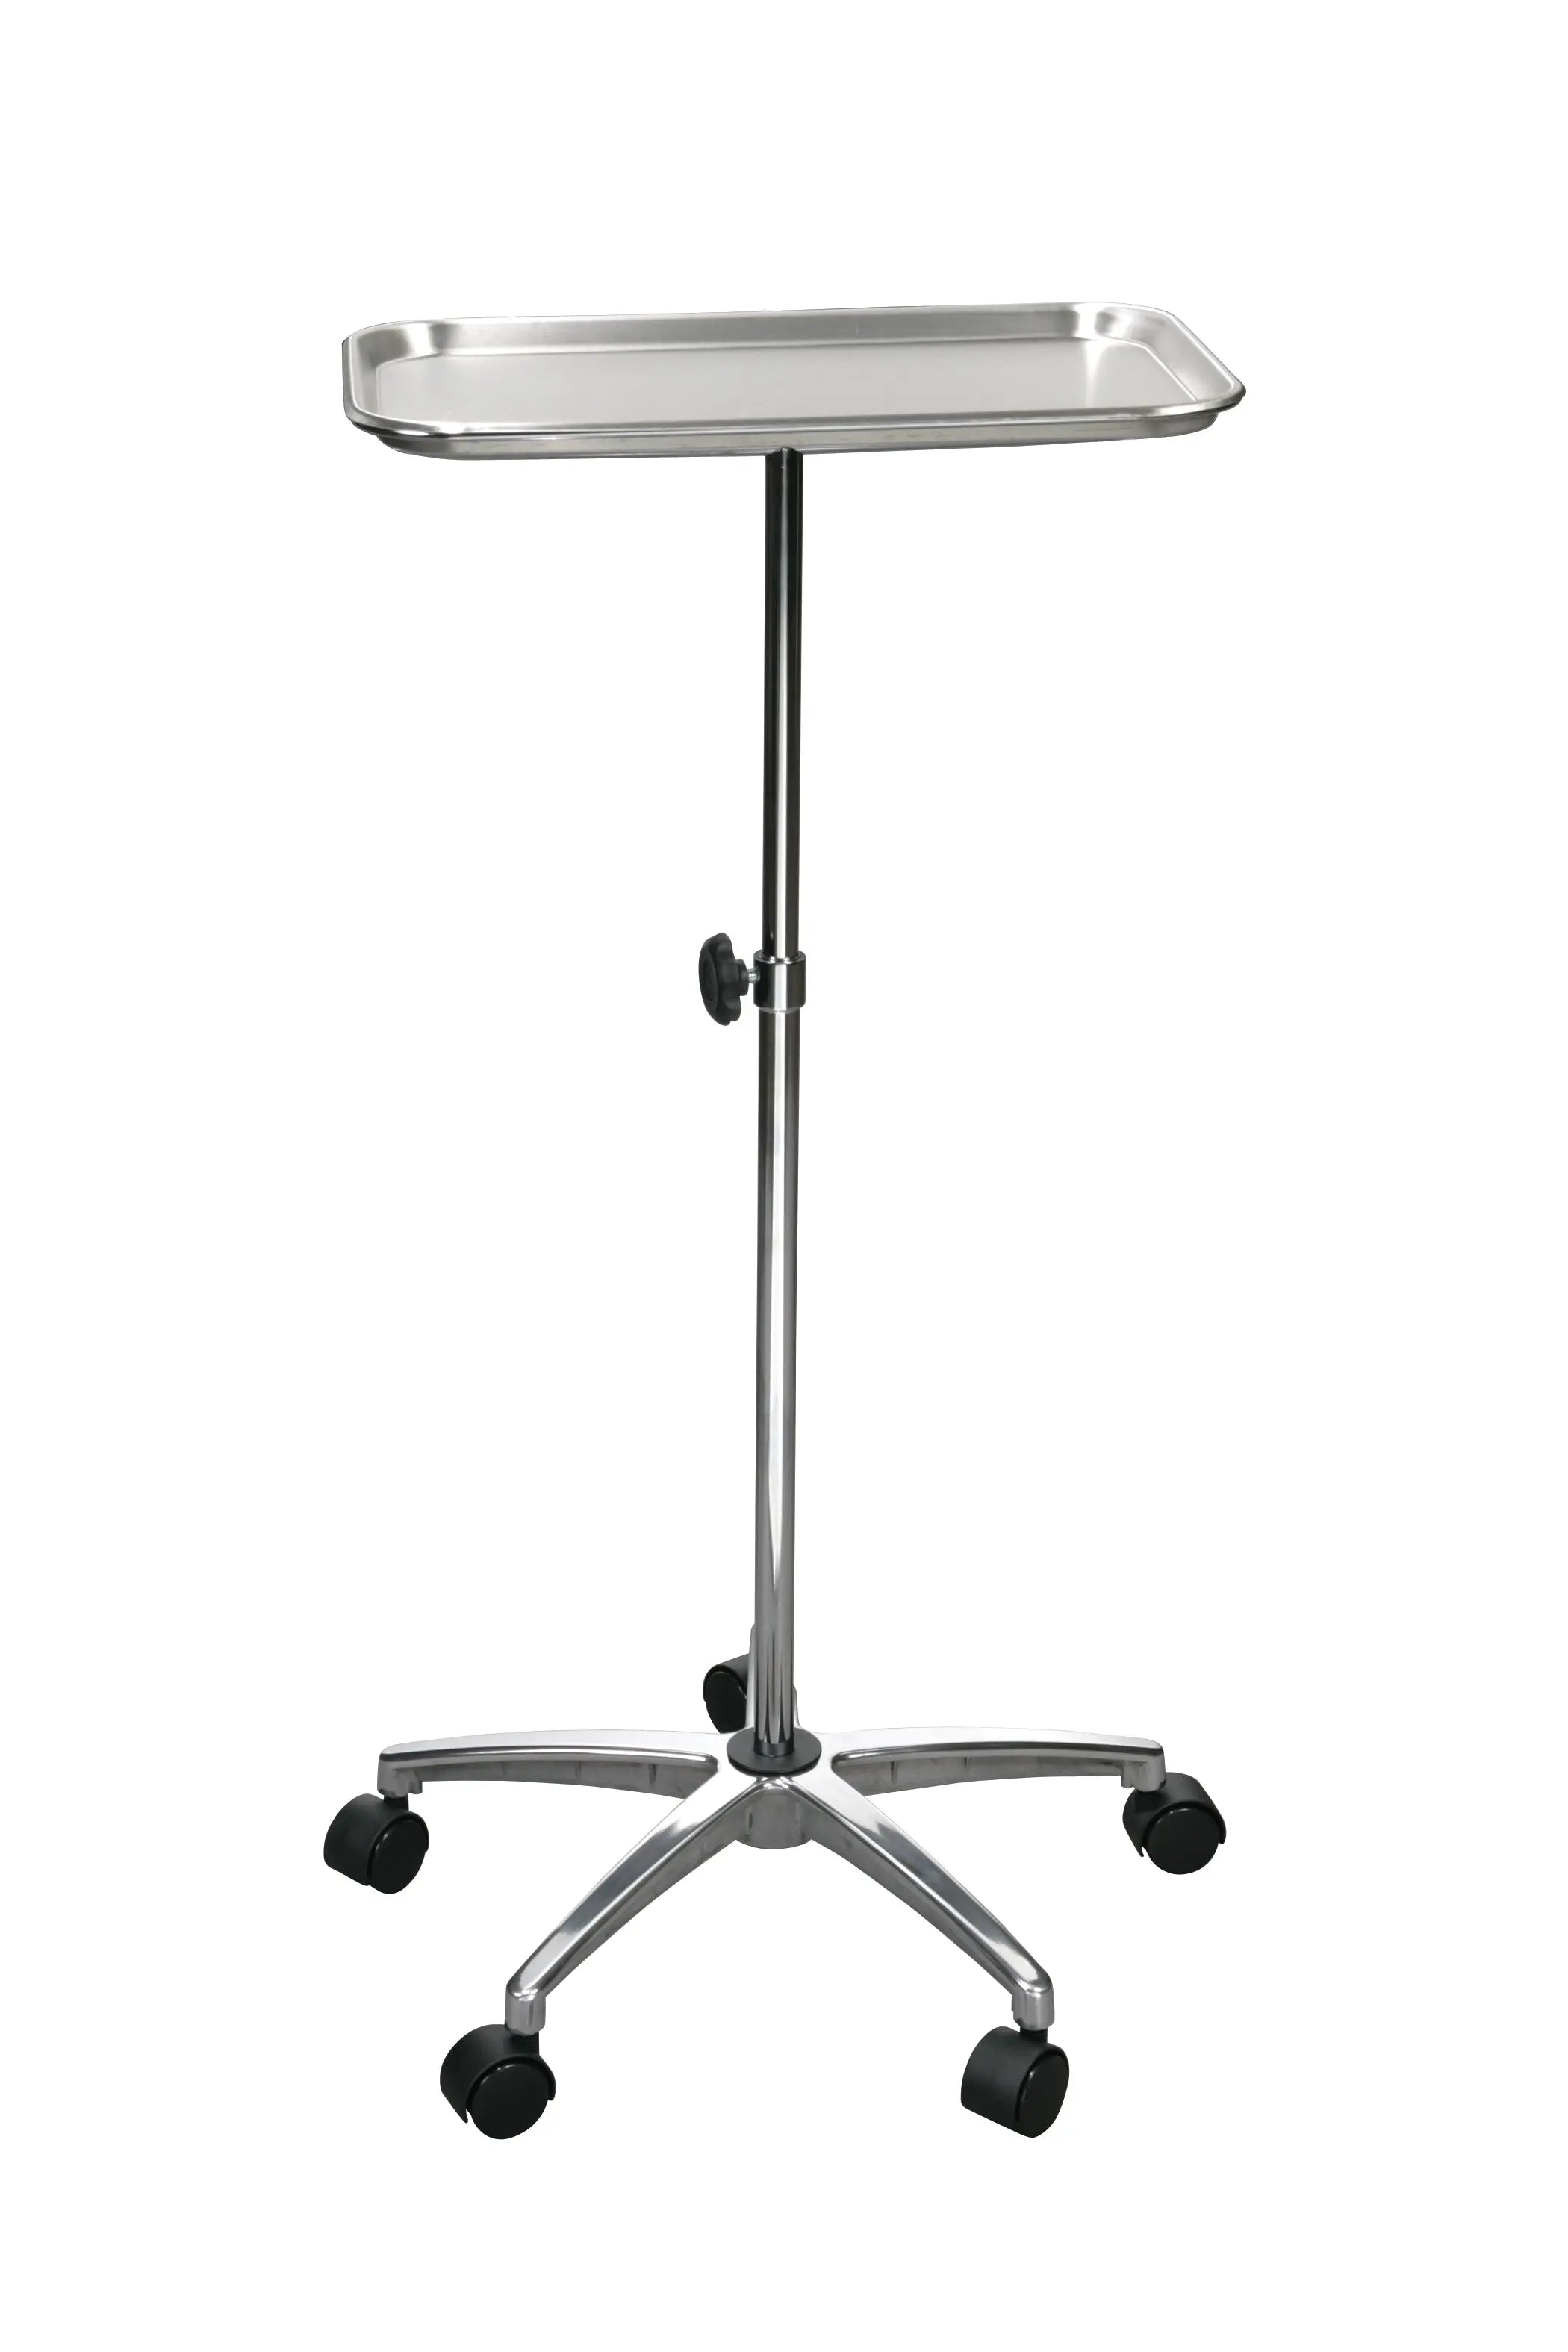 Mayo Instrument Stand with Mobile 5 Caster Base - Home Health Store Inc